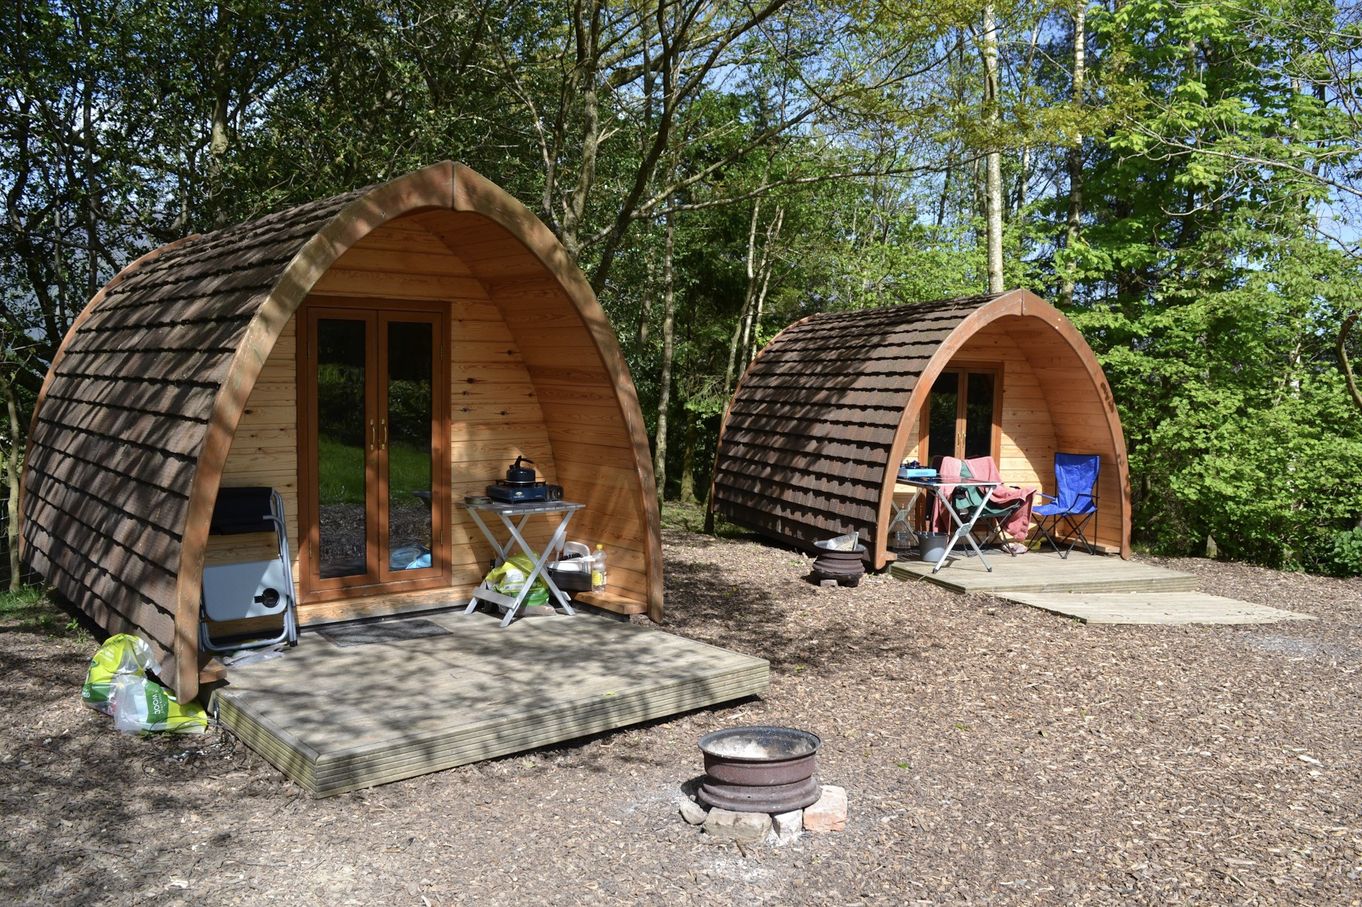 Lanefoot Farm Campsite and Glamping